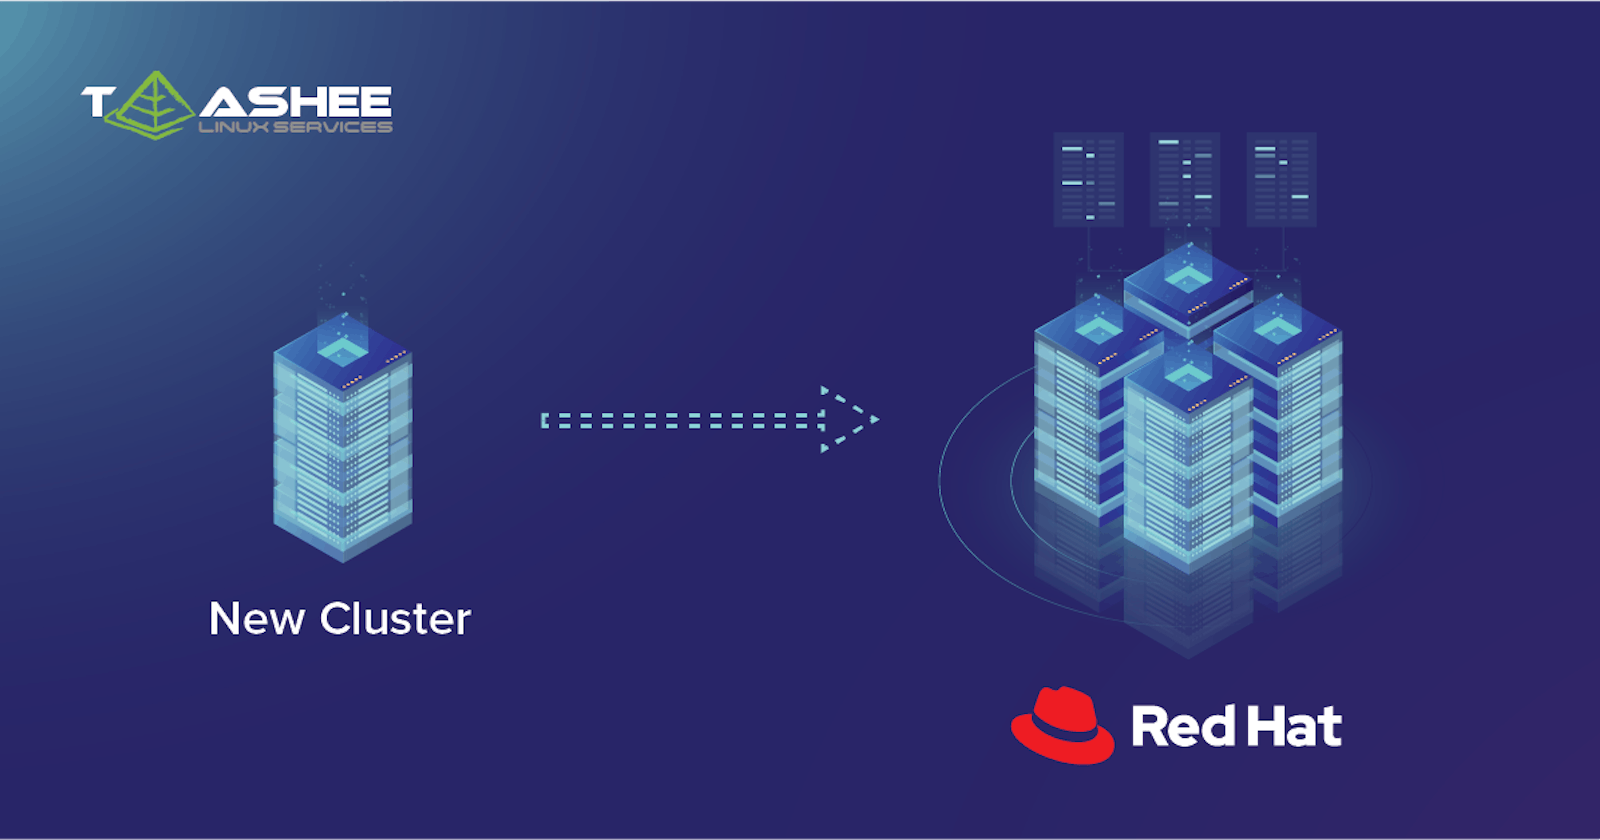 10 Easy Steps to Create a New Cluster in an Existing RHEV Setup